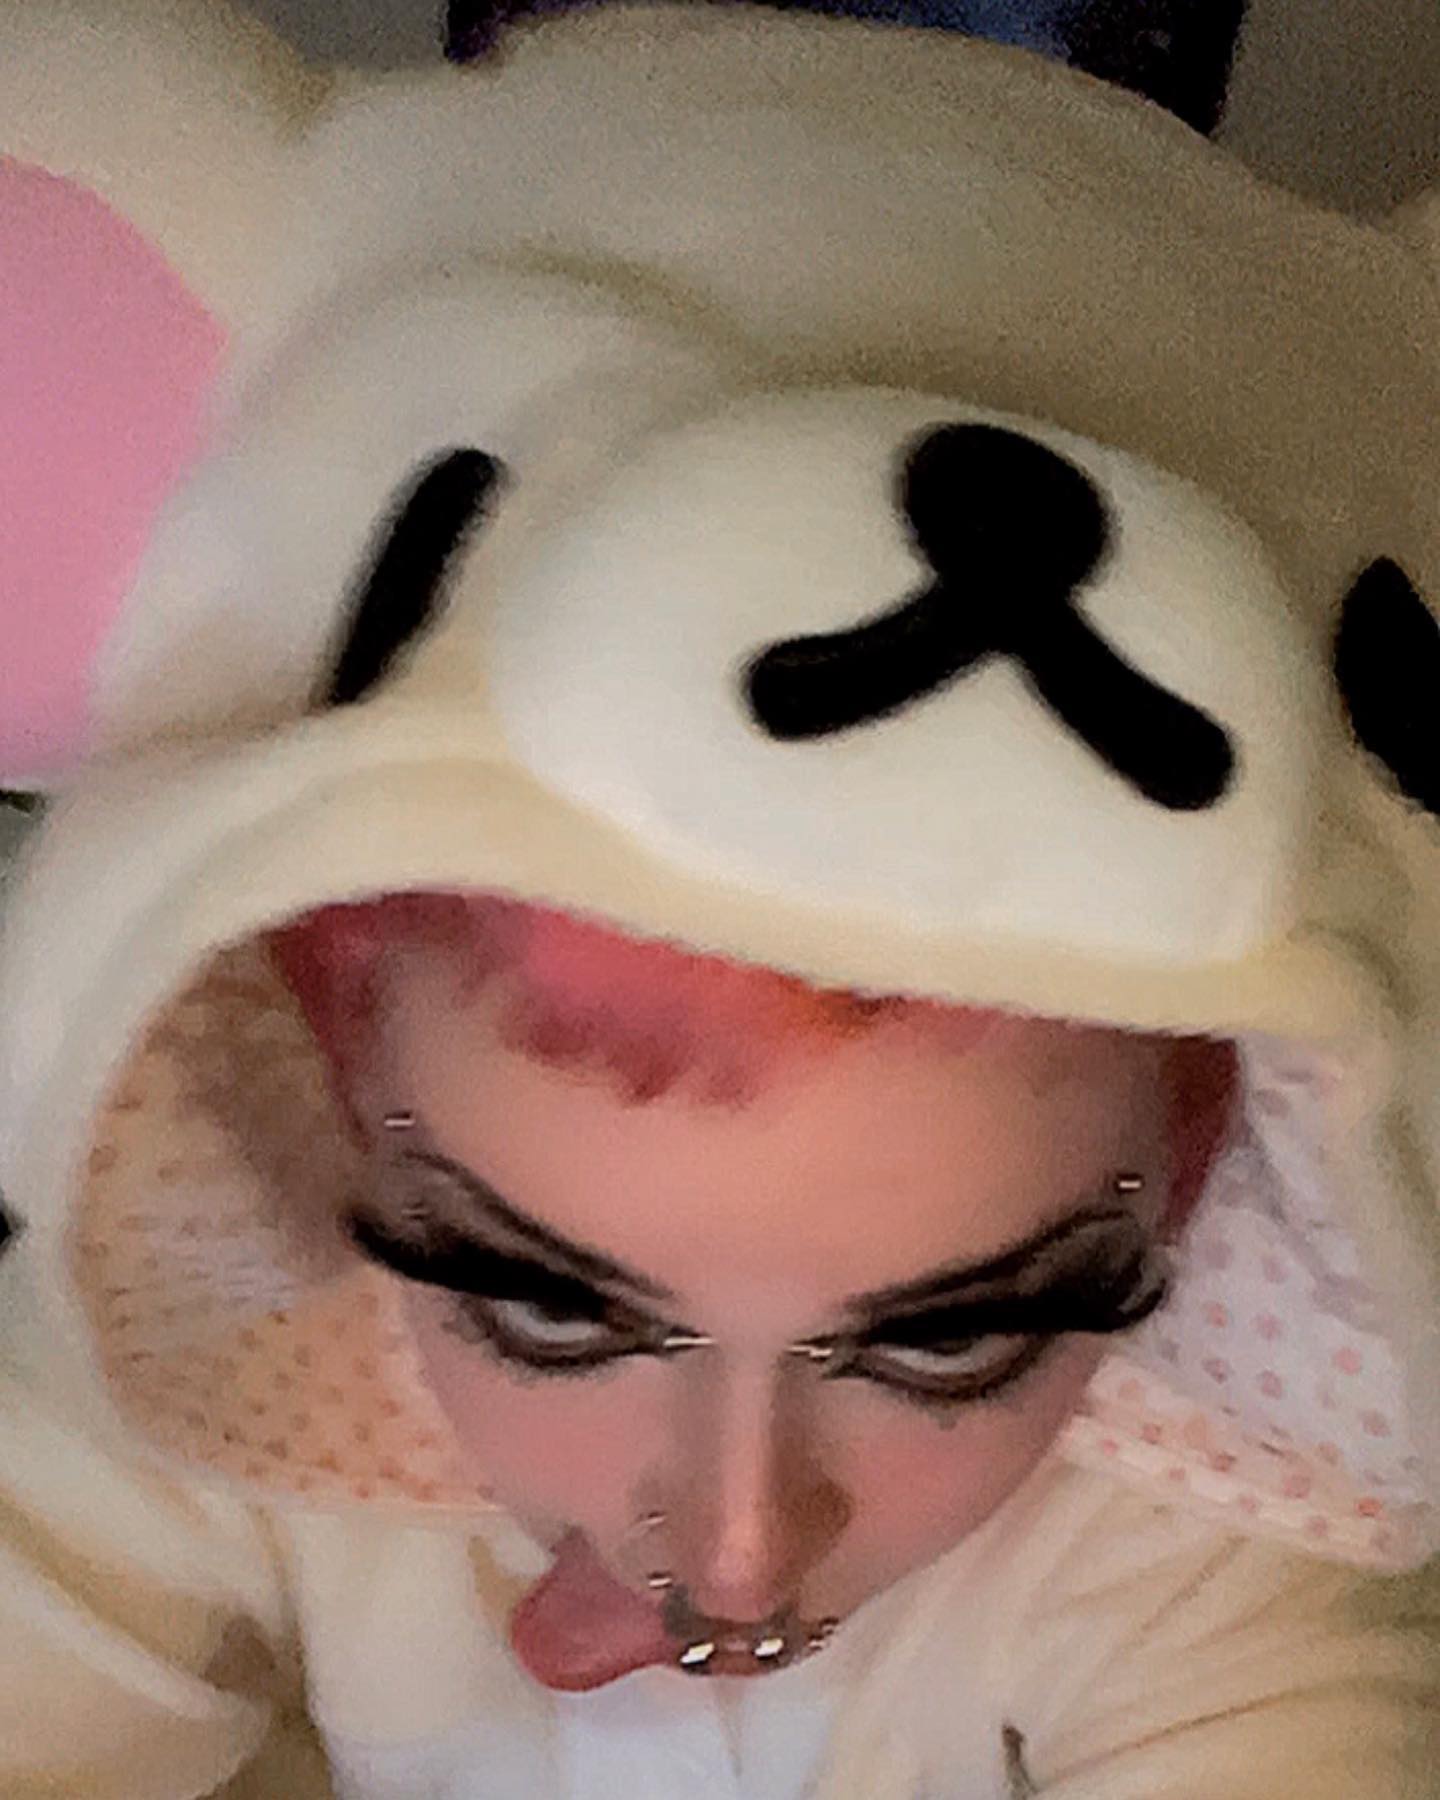 korilakkuma hours ʕ•㉨•ʔ 🐾
-
-
-
-
-
-
-
-
-
-
-
-
-
-
-
-
-
-
-
-
-
#alternative #alt #gothgirl #piercings #cosplay #cosplaygirl #cosplayer #soft #softcore #pastelgoth #makeup #makeupartist #makeupinspo #makeuplooks #goth #gothic #gothicgirl #contentcreator #emo #pastel #nsfwcontent #twitter #nsfwtweets #snapchat👻 #of #ofgirl #onlyfriends #thicc #sugarbaby #catgirl